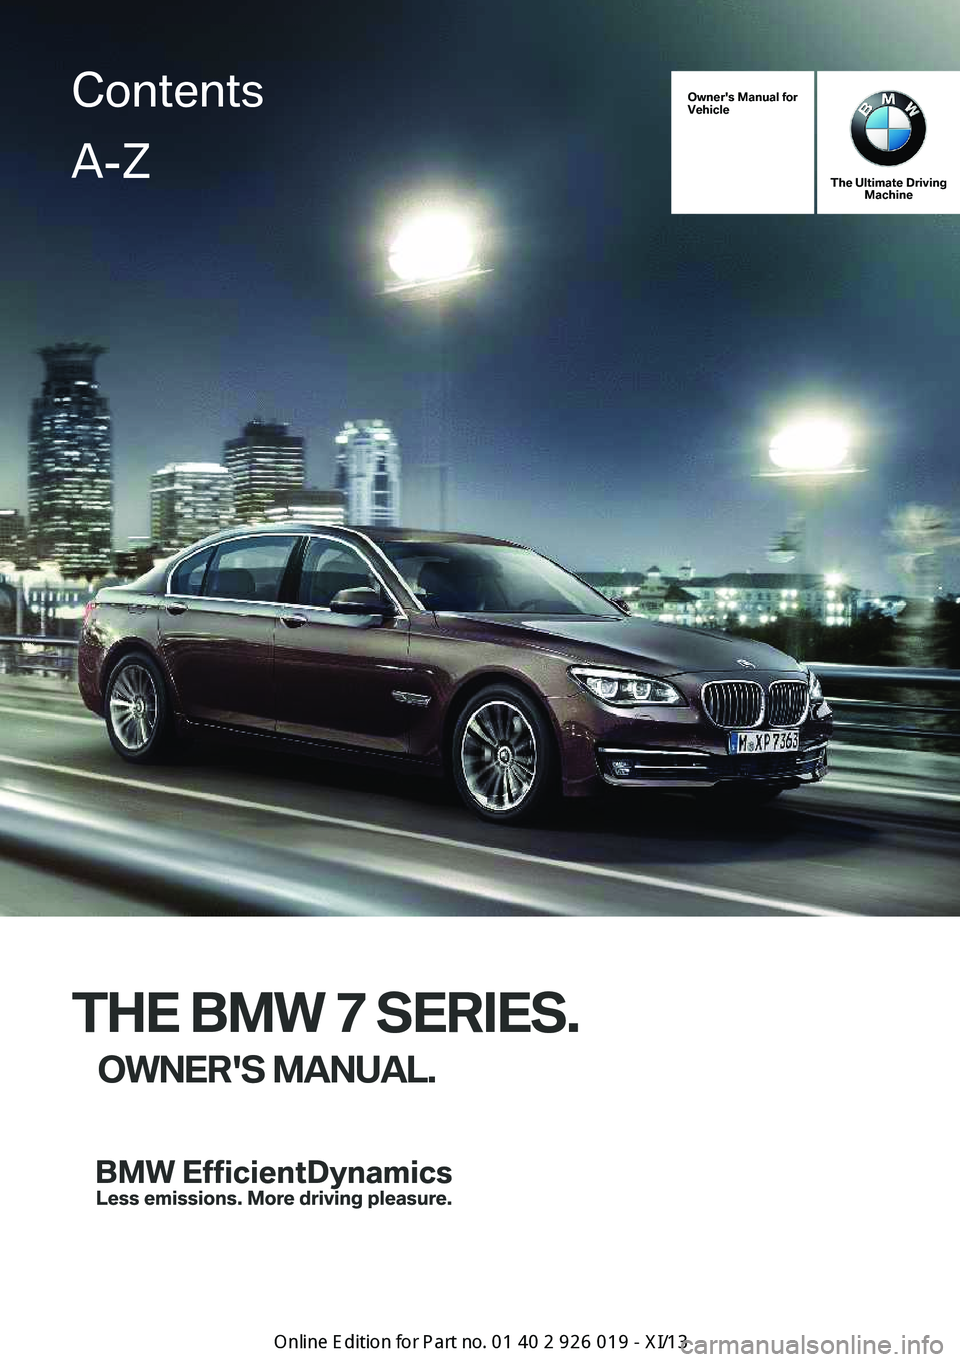 BMW 7 SERIES LONG 2013 F02 Owners Manual Owner's Manual for
Vehicle
The Ultimate Driving Machine
THE BMW 7 SERIES.
OWNER'S MANUAL.
ContentsA-Z
Online Edition for Part no. 01 40 2 909 749 - VI/13   